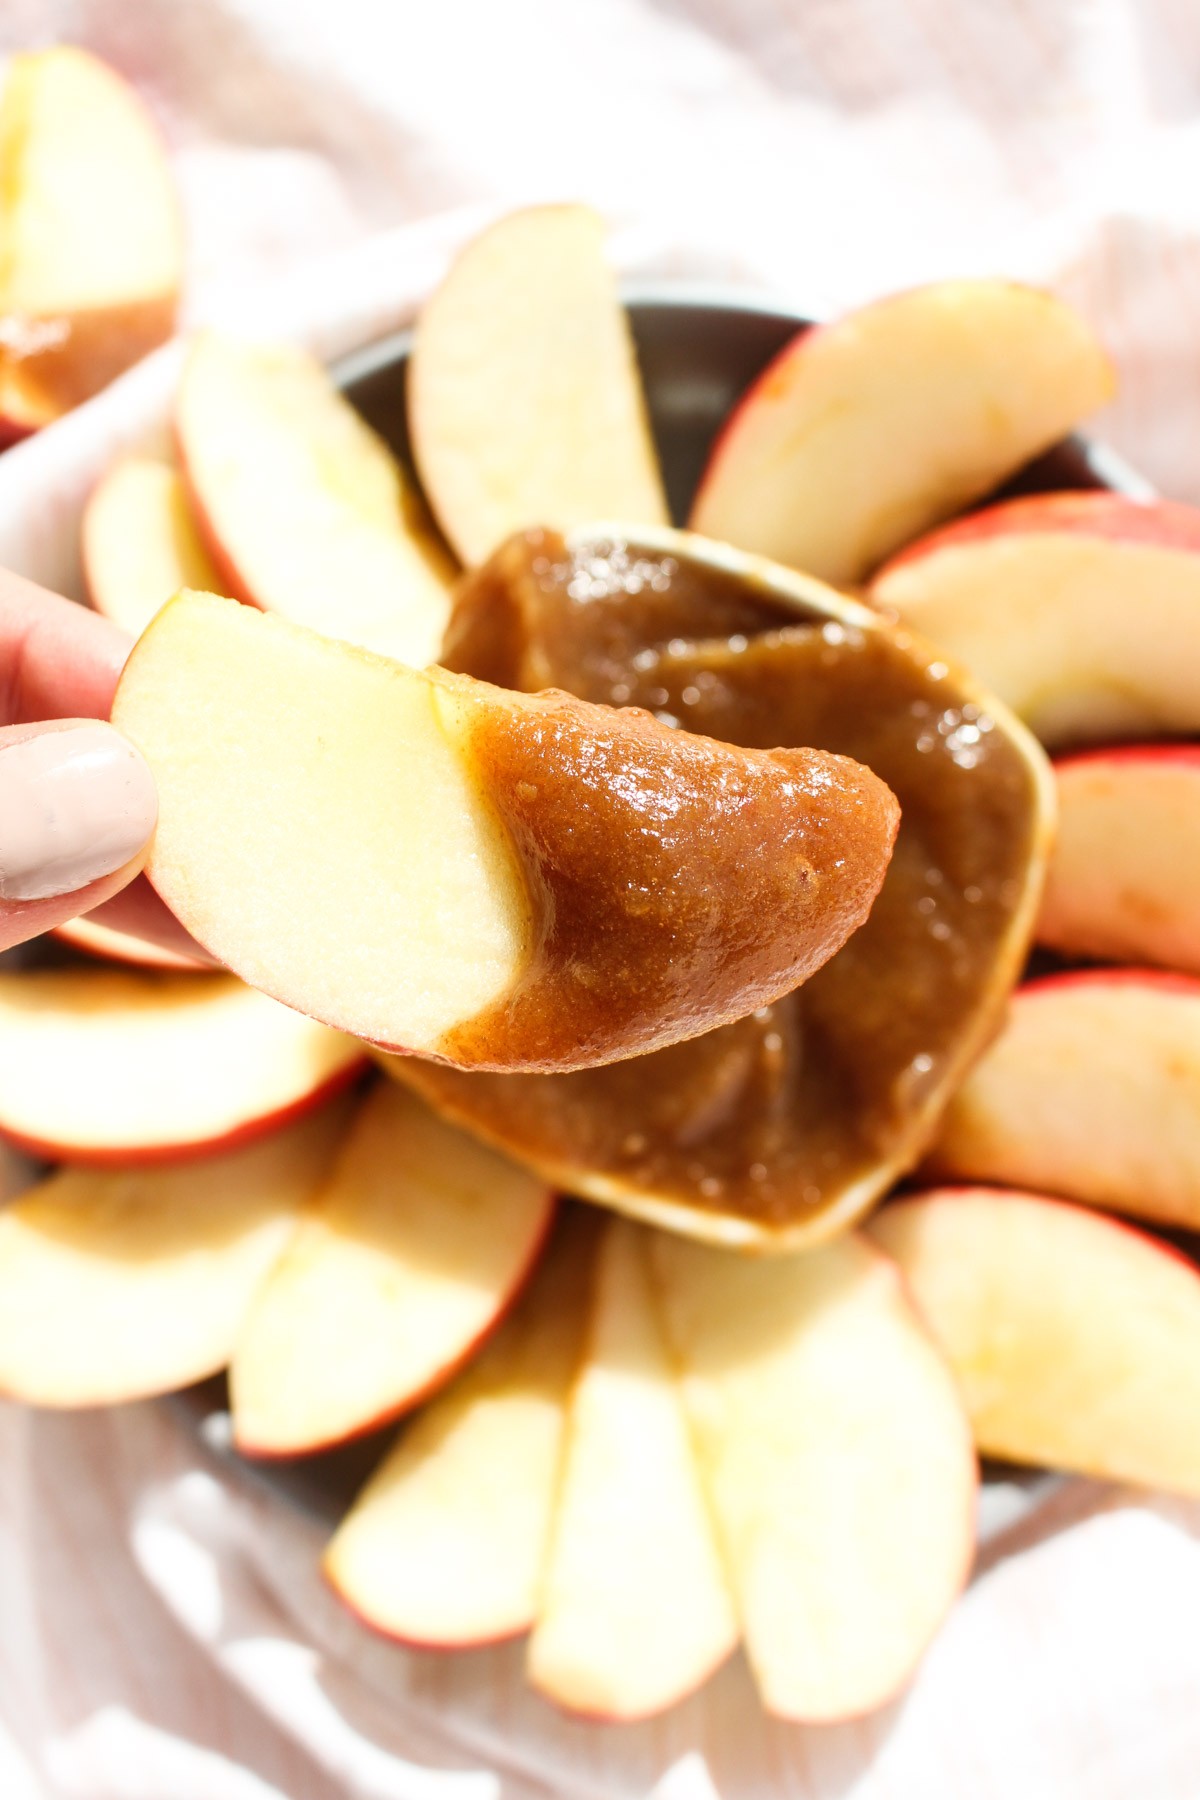 Hand holding slice of apple with dip.